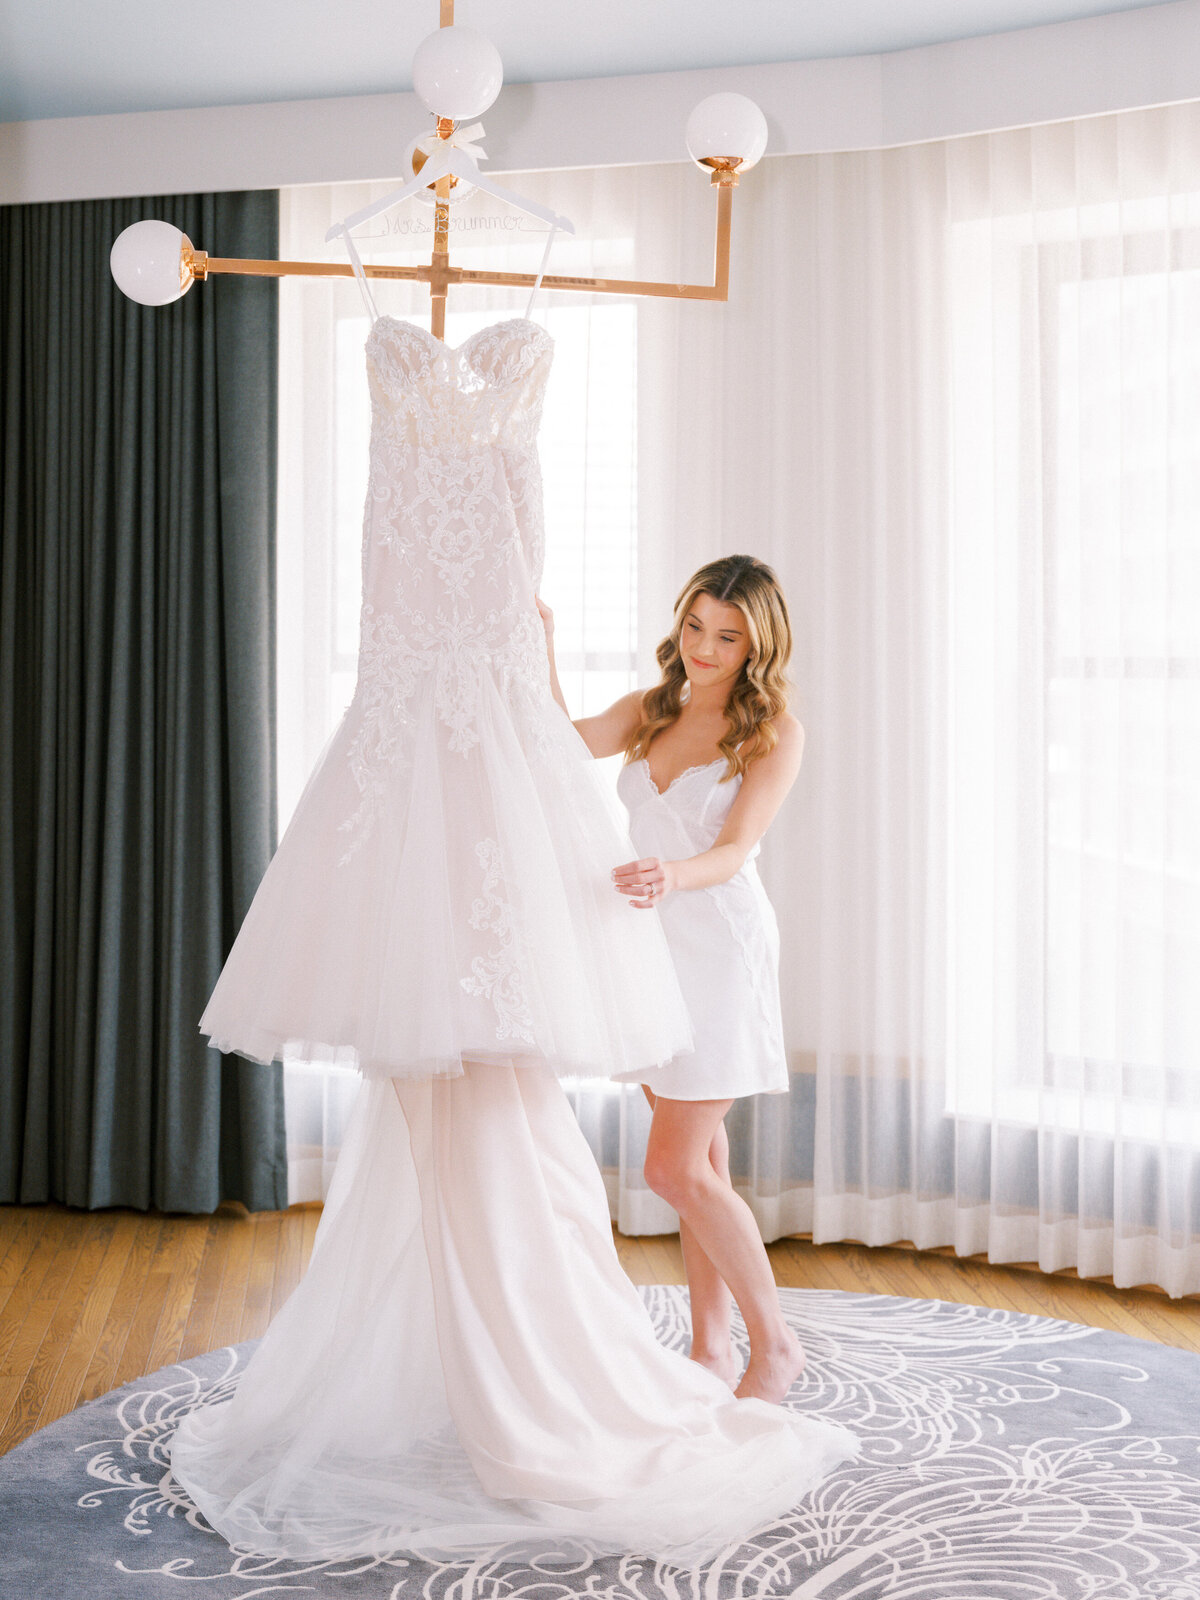 bride-getting-ready-cleveland-hotel-suite-00001